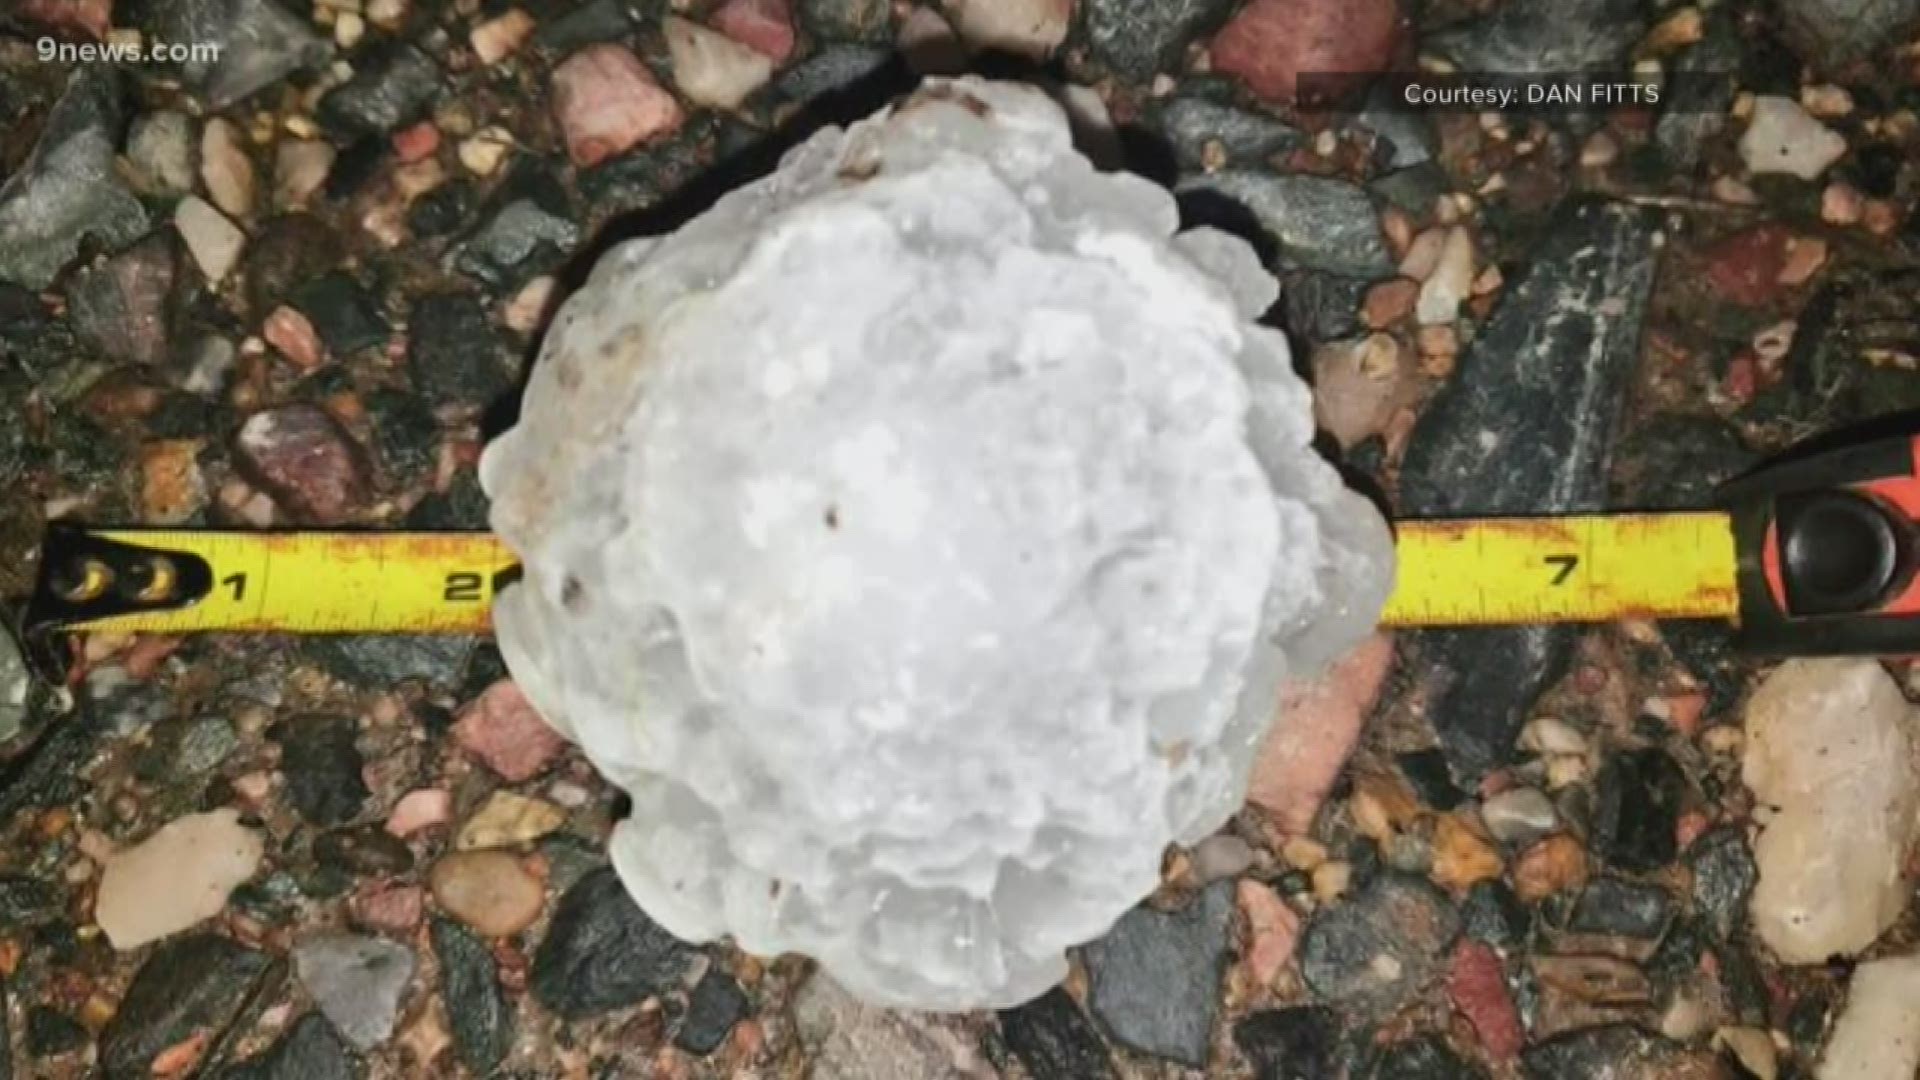 Hail the size of grapefruit fell on the eastern plains Sunday night, causing lots of damage to homes, cars and crops. Fortunately, no major injuries were reported.